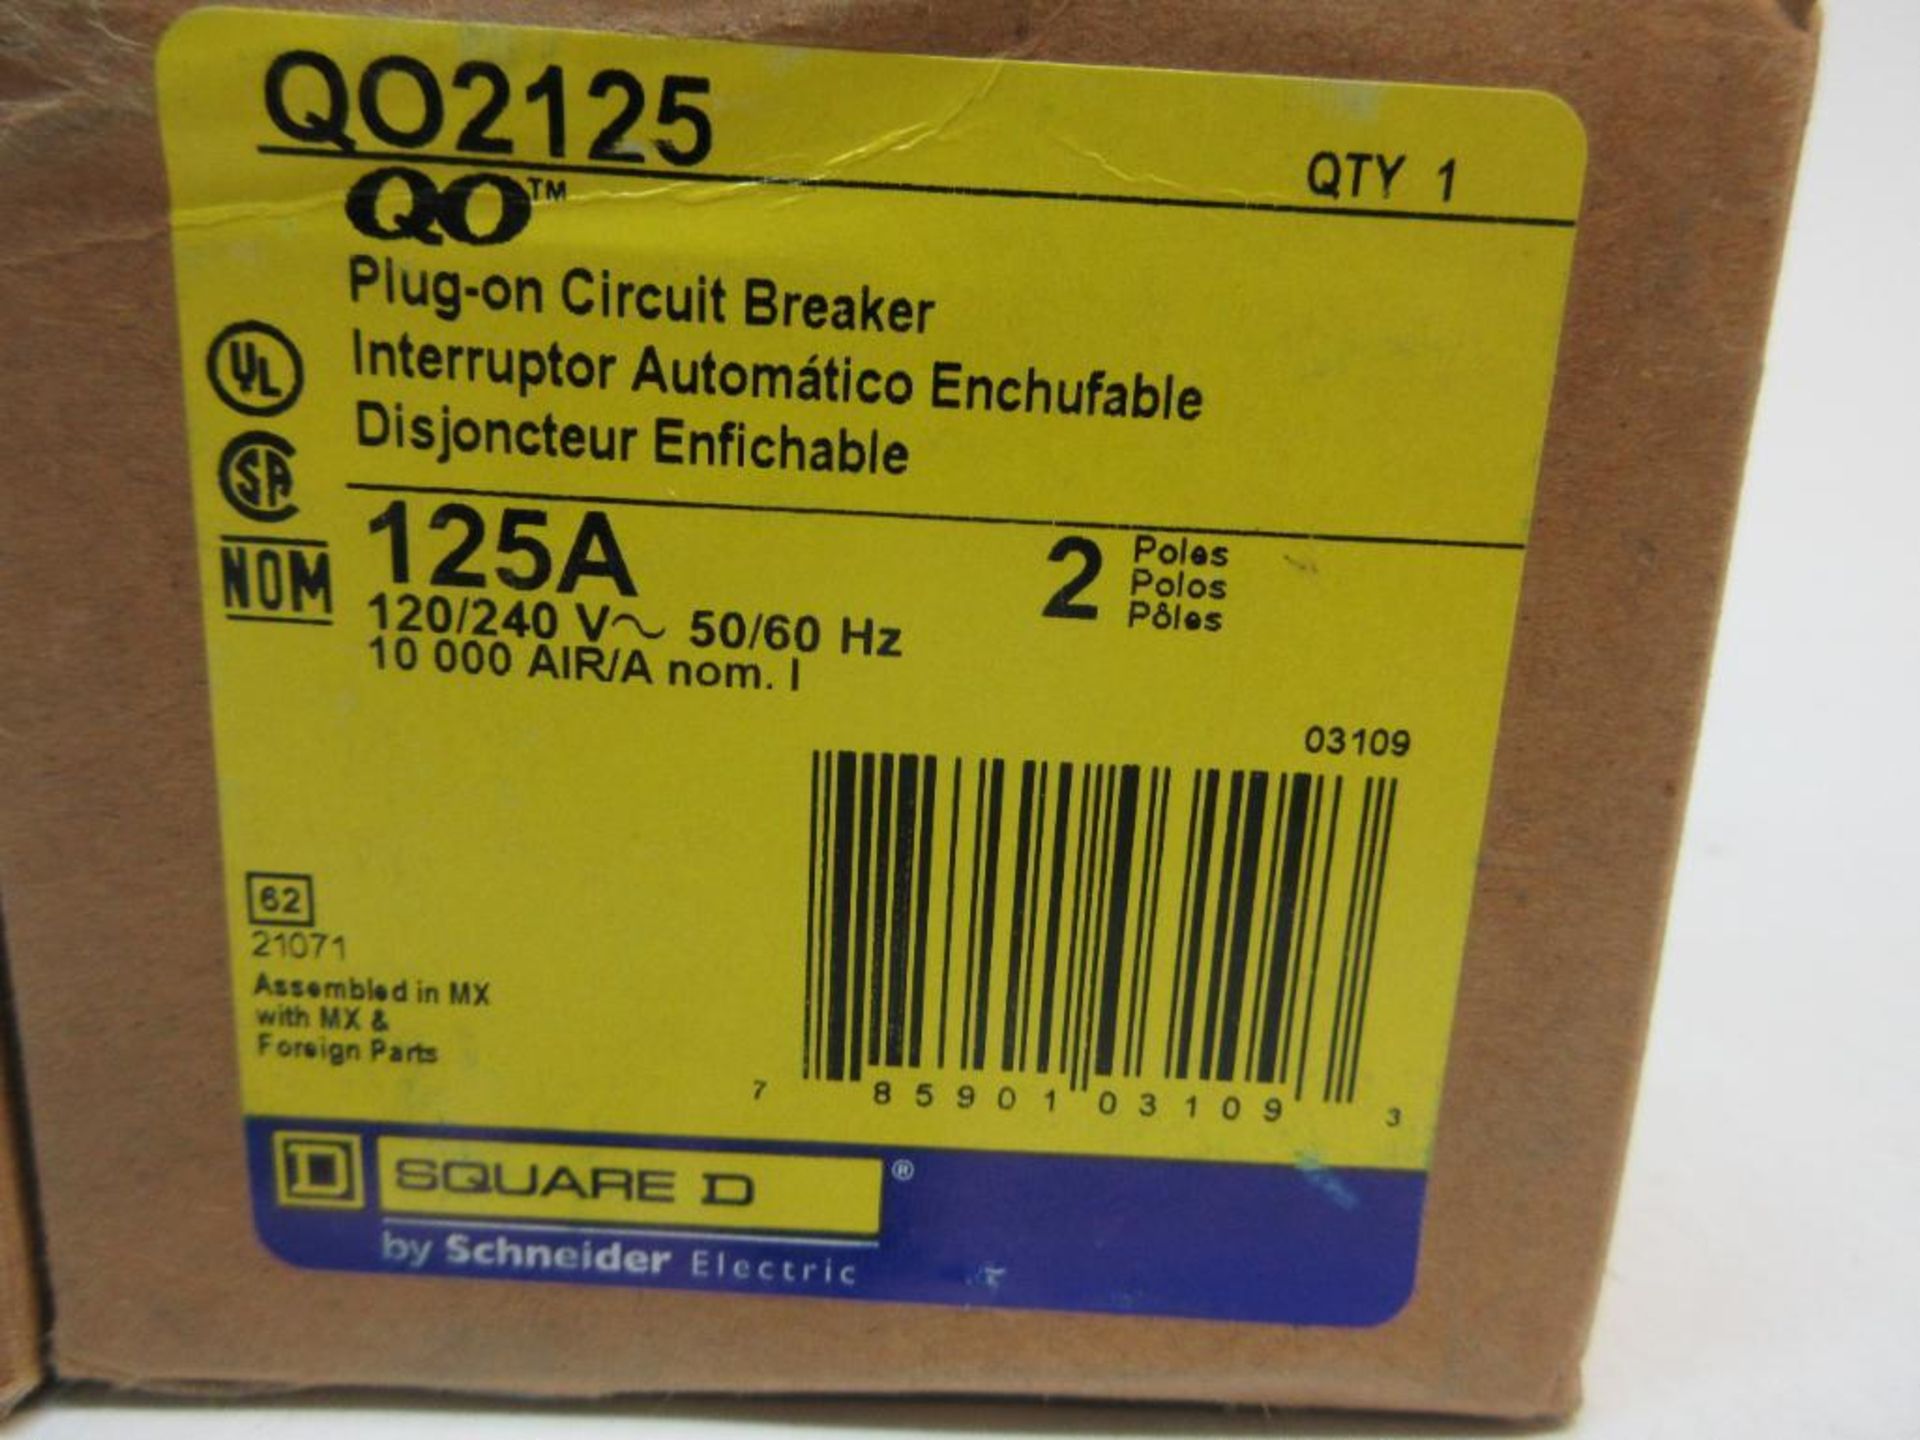 (12) SQUARE D Q02125 PLUG-ON CIRCUIT BREAKER 125A 2 POLE NEW (THIS LOT IS FOB CAMARILLO CA) - (There - Image 2 of 2